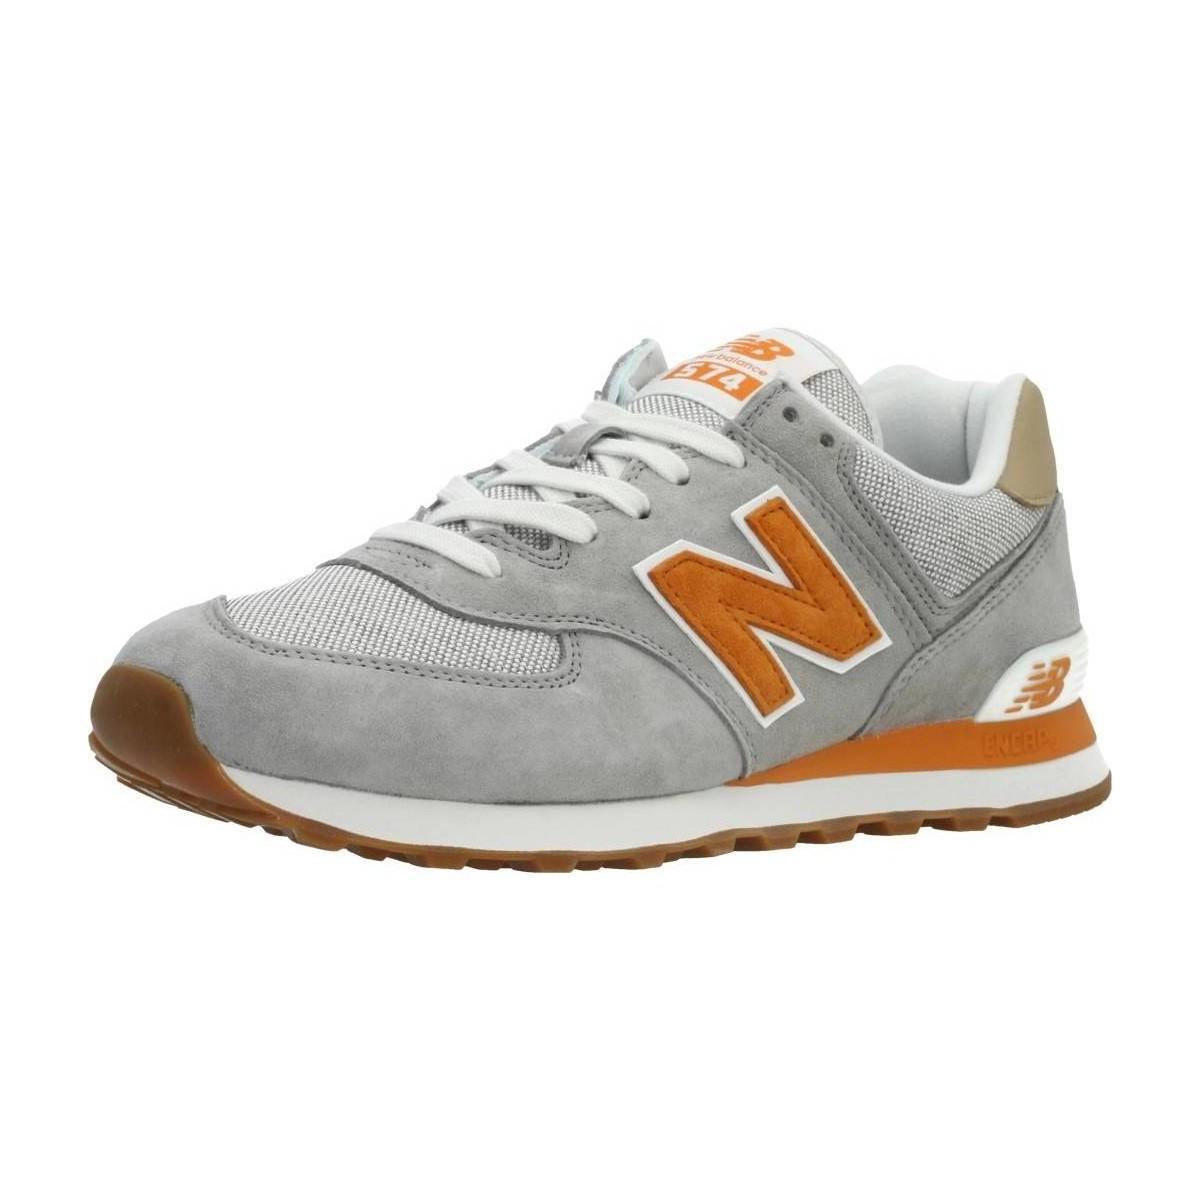 New Balance Ml574 Mdg Men's Shoes (trainers) In Grey in Grey for Men - Lyst